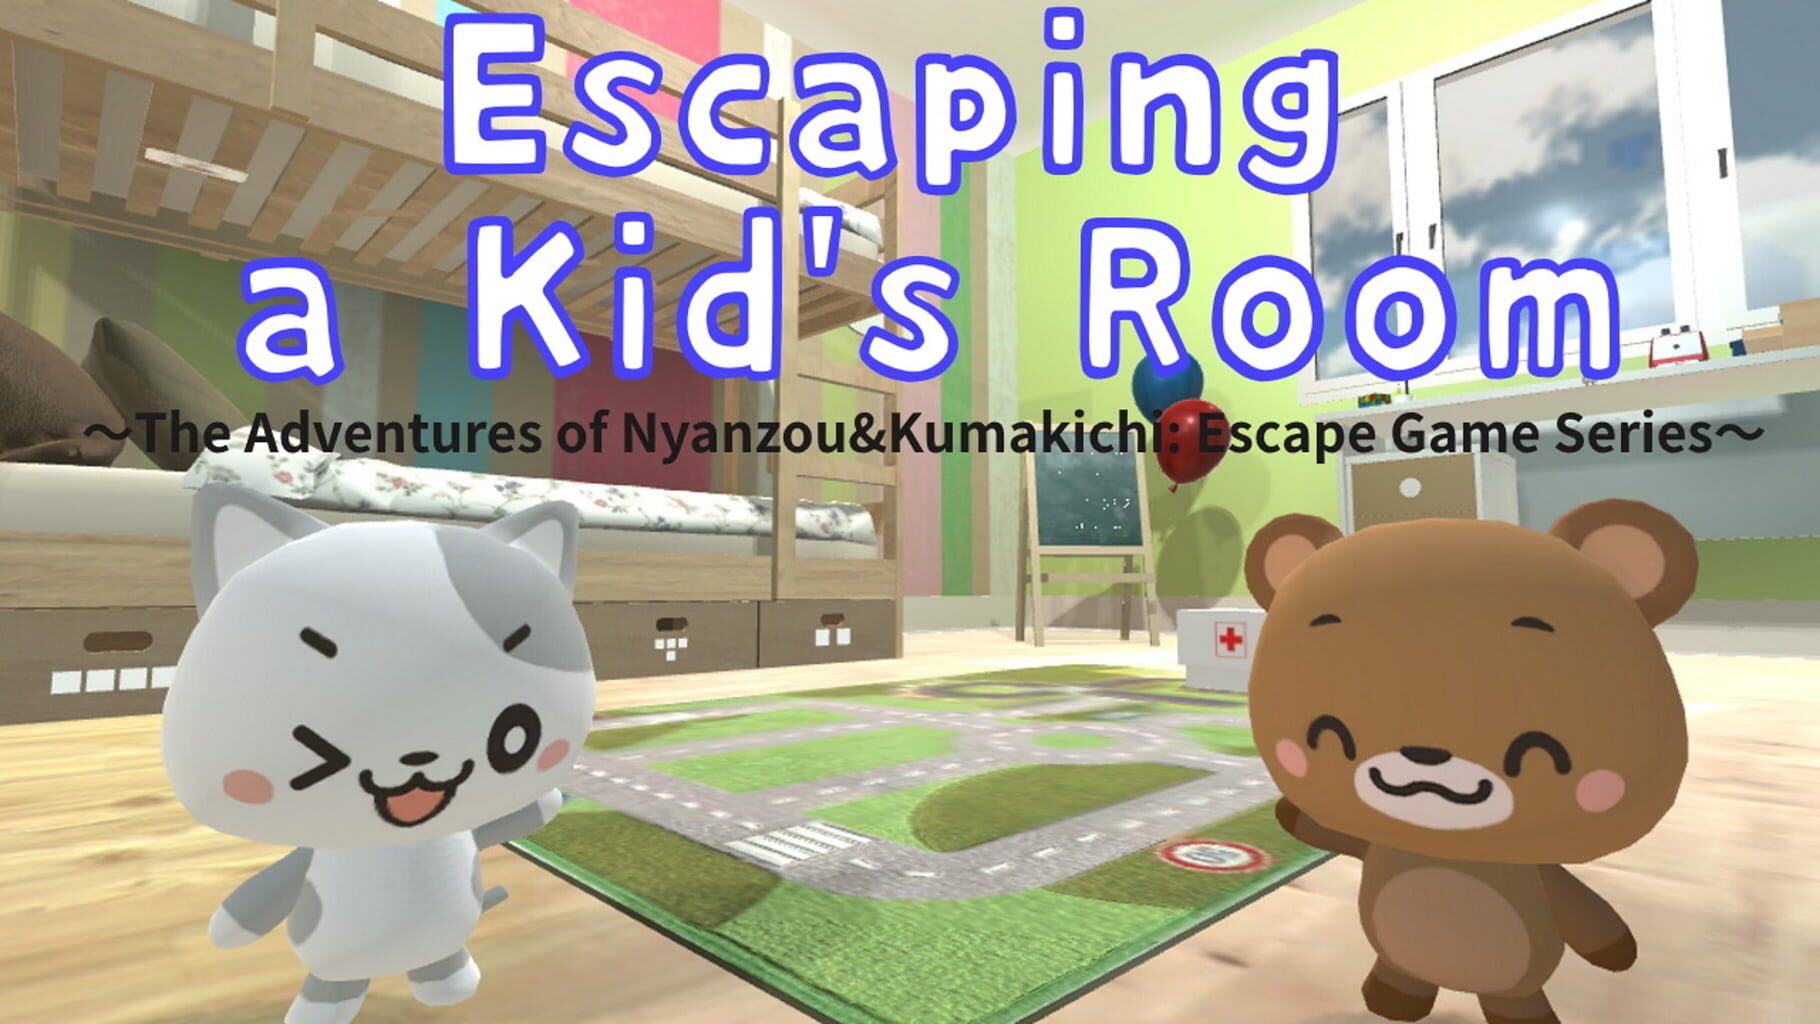 Escaping a Kid's Room: The Adventures of Nyanzou & Kumakichi - Escape Game Series artwork